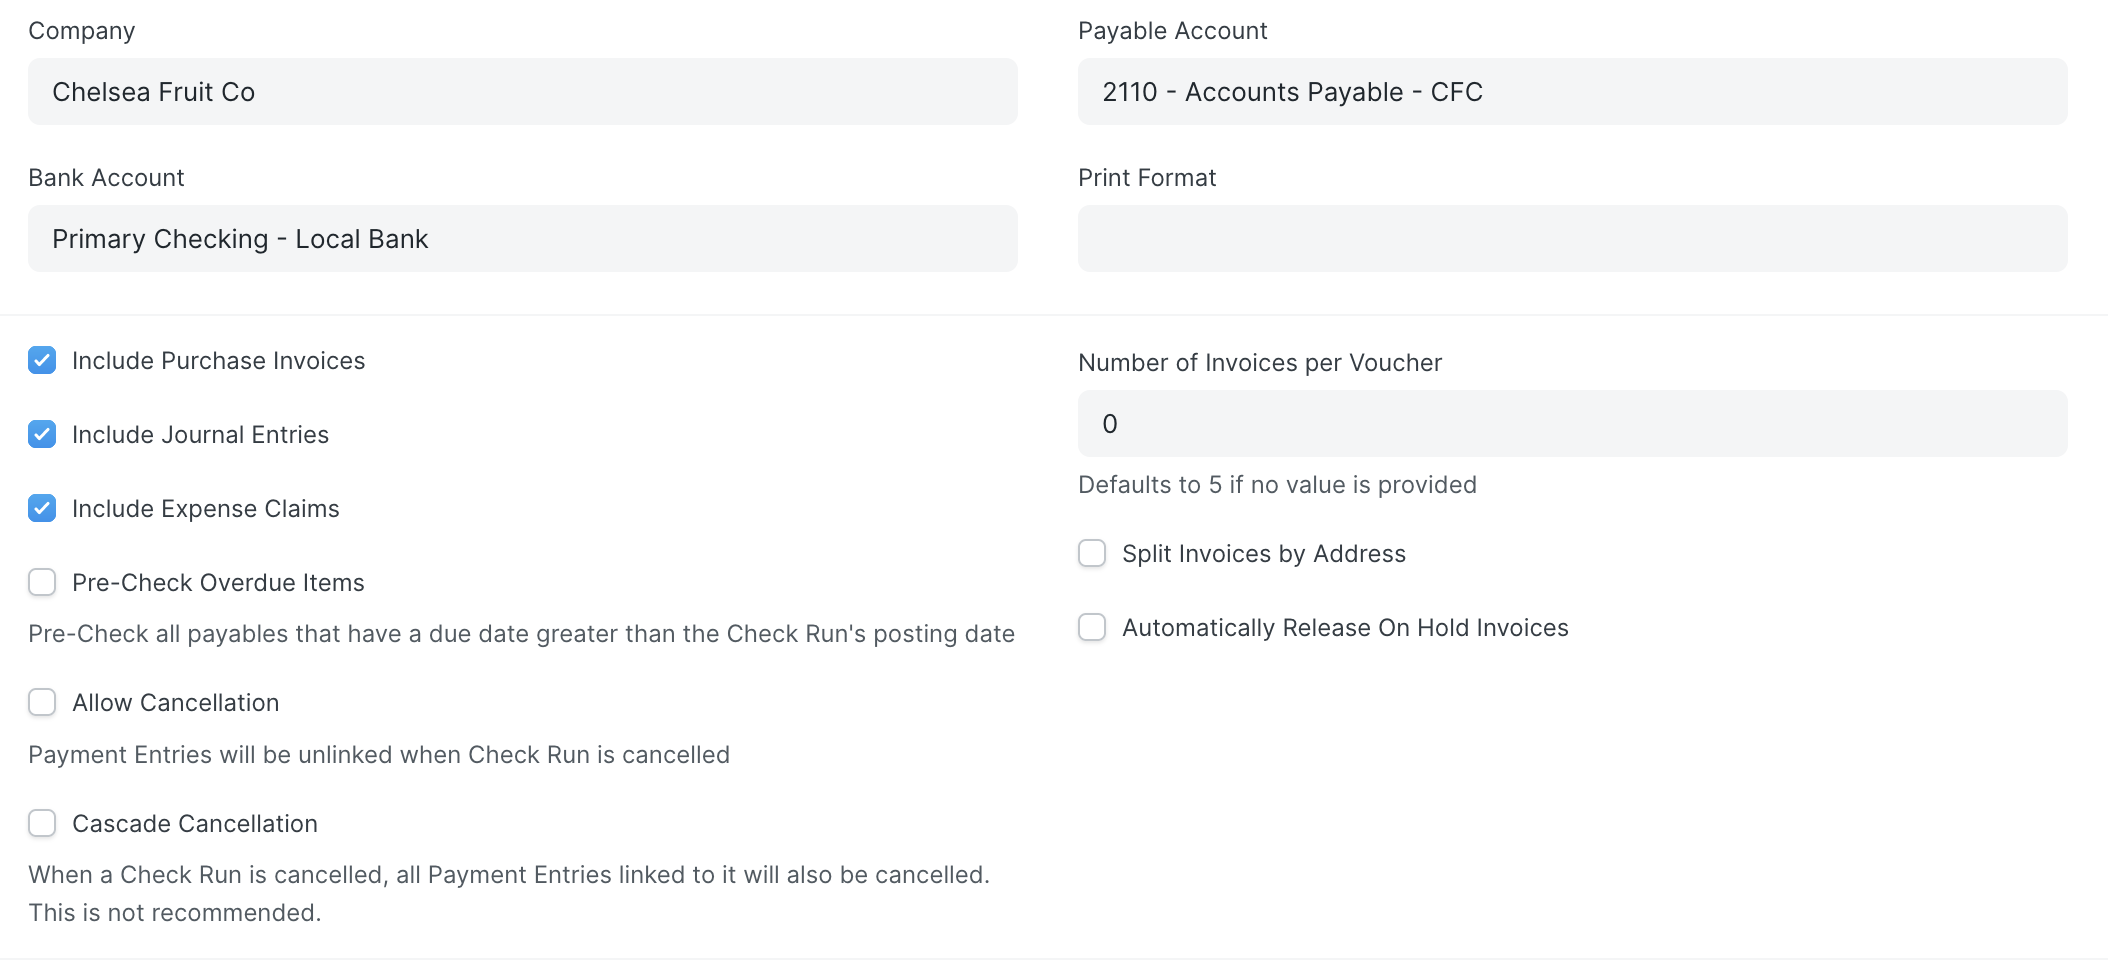 Screen shot showing the top portion of default settings for one Bank Account and Payable Account combination. A description of each setting and its default value is listed below.